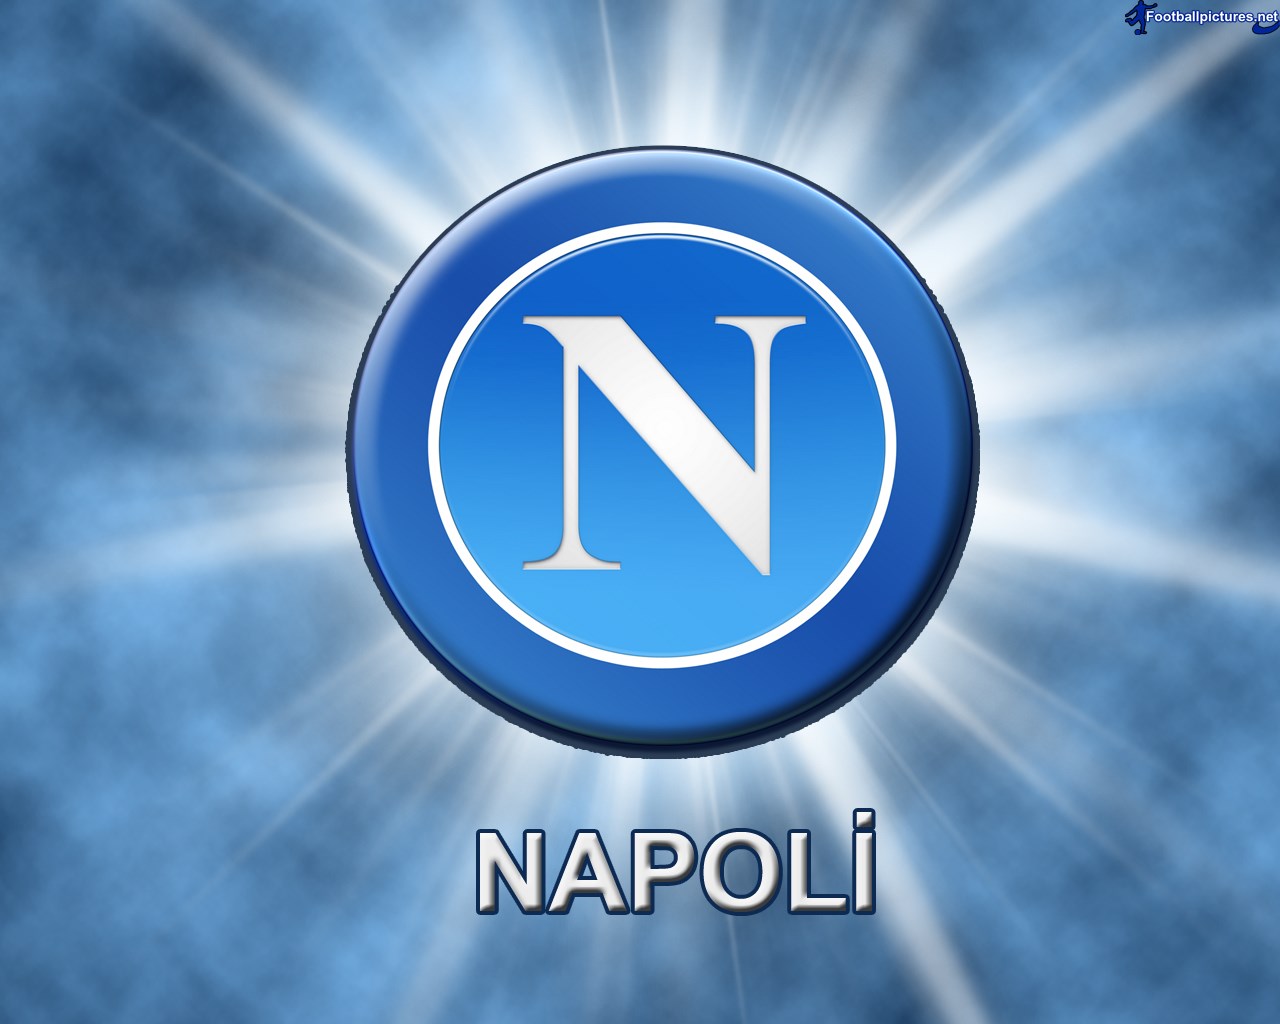 S.s.c. Napoli , HD Wallpaper & Backgrounds